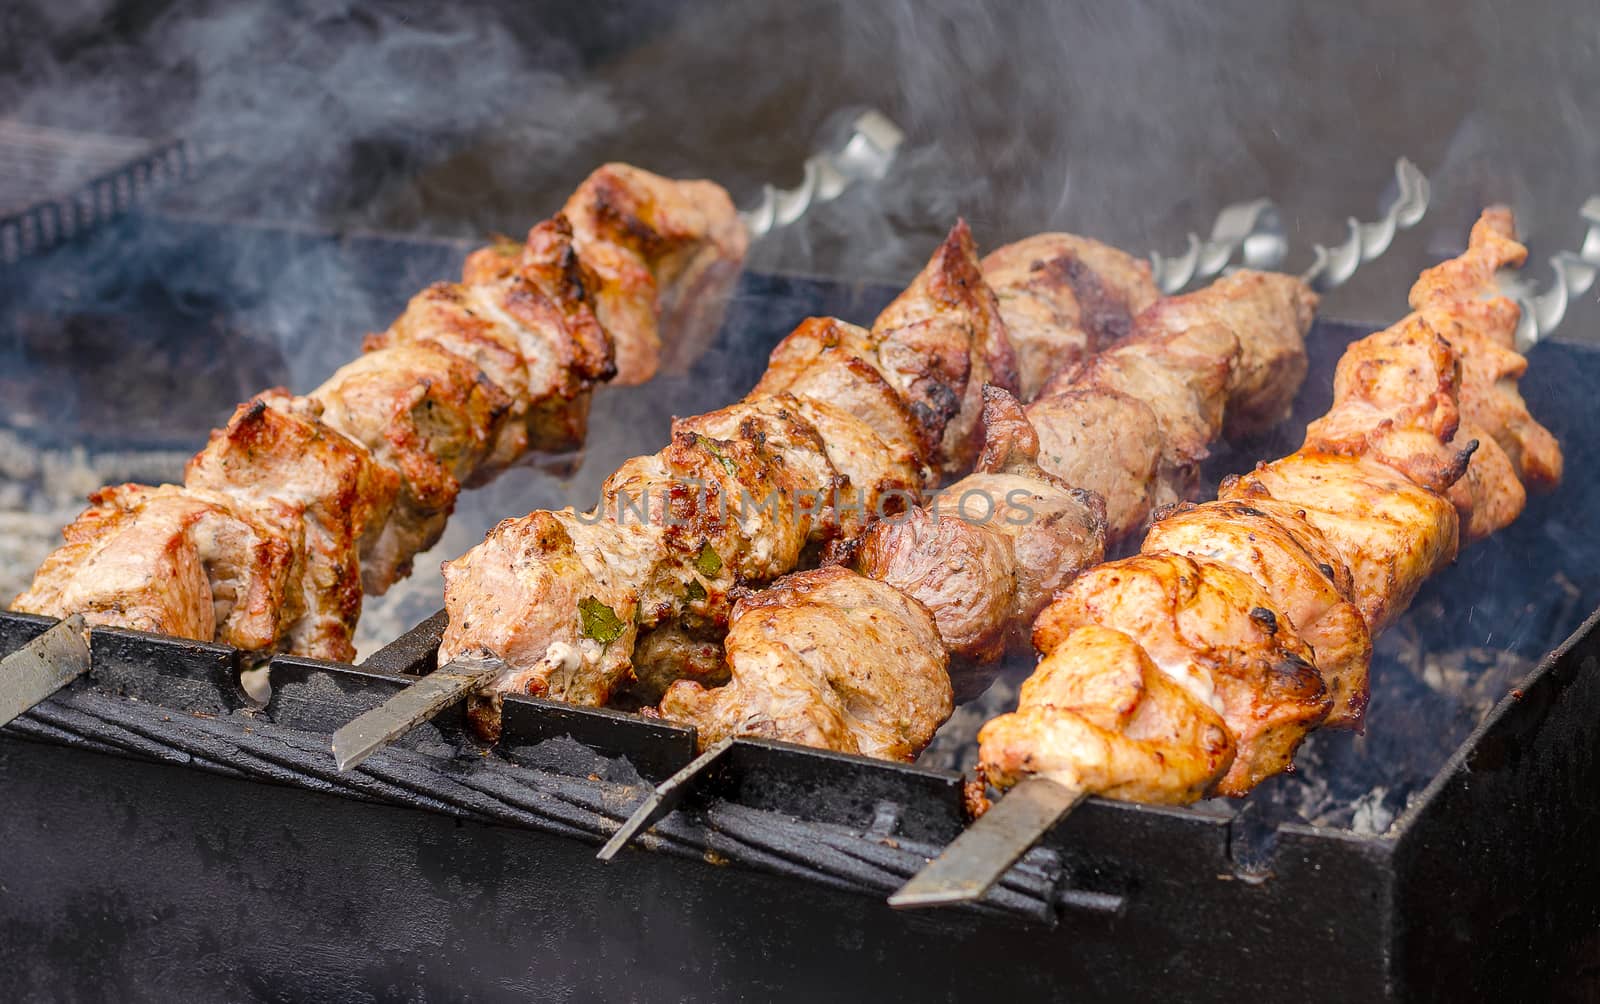 Marinated shashlik or kebab preparing on a barbecue grill over charcoal